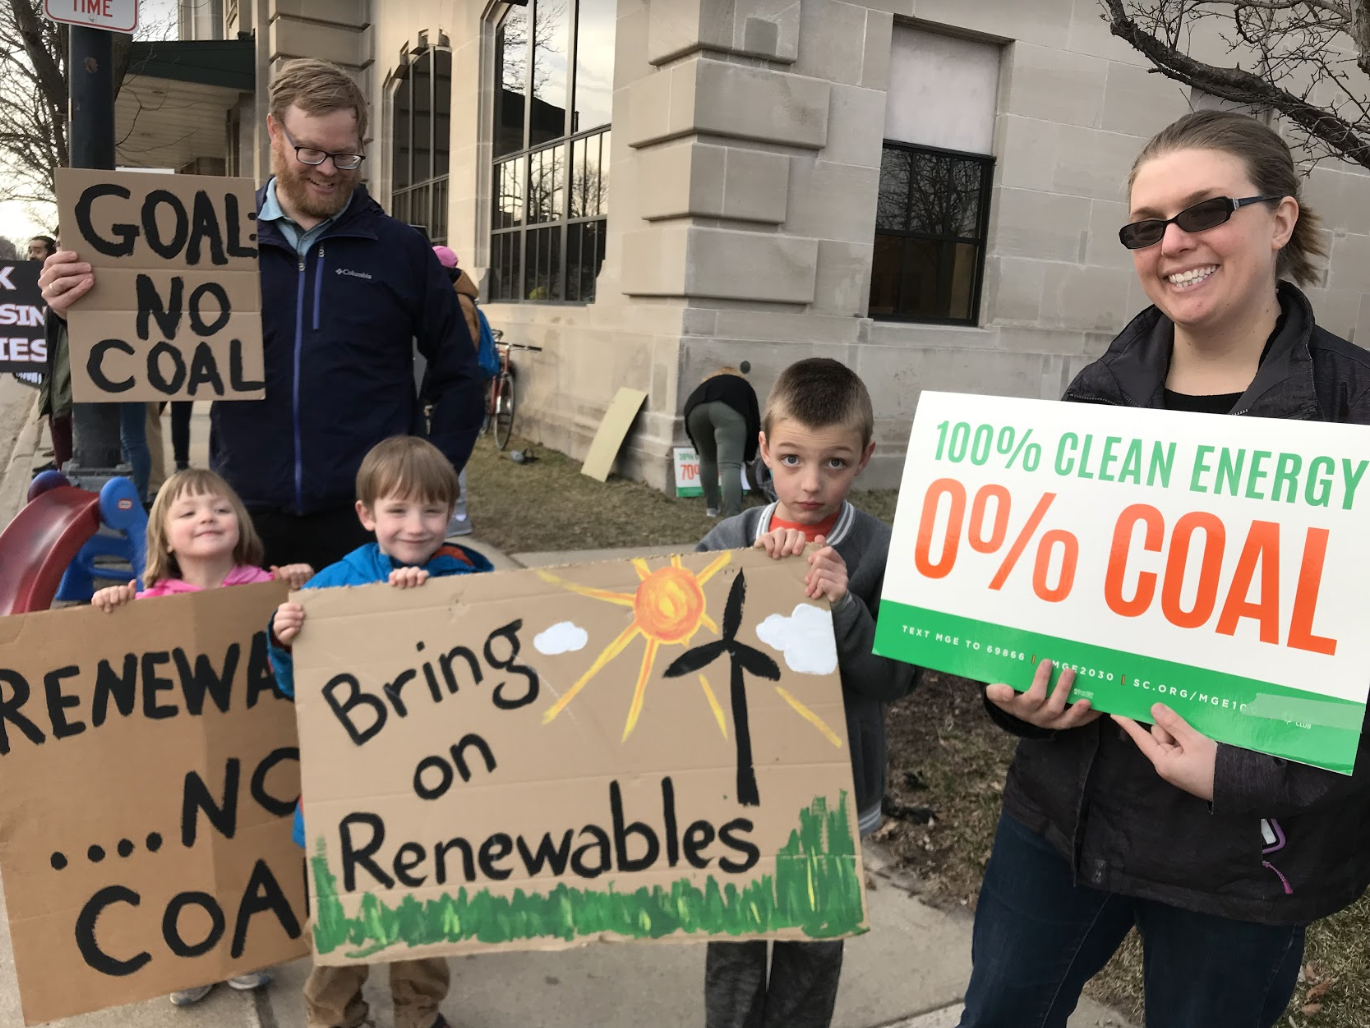 Protesters (including children) holding up signs opposing coal and demanding cleaner sources of energy